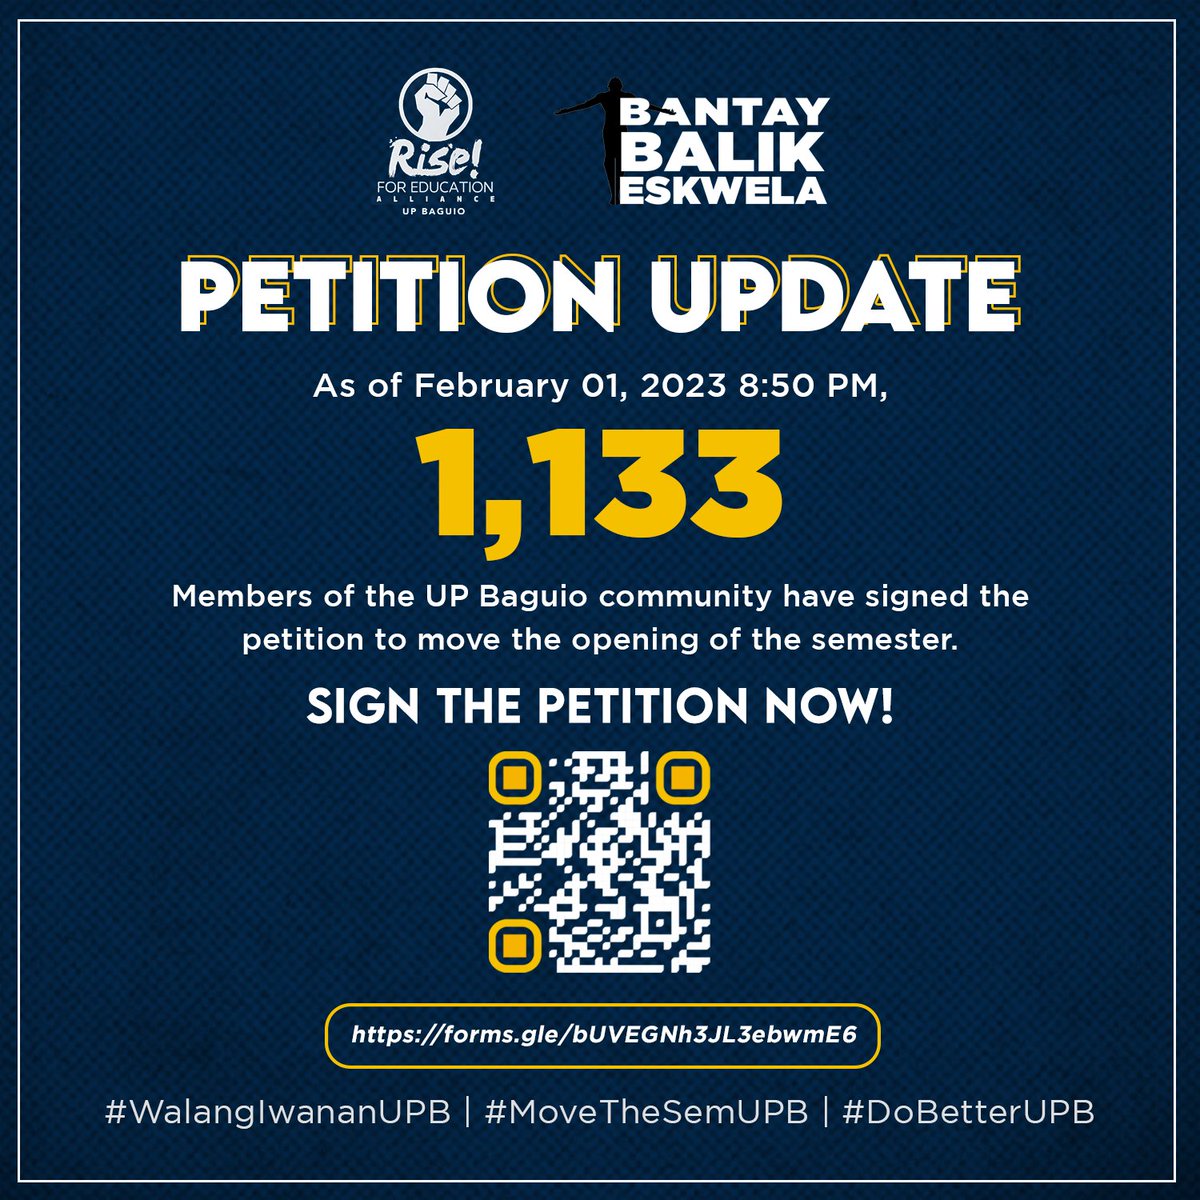 #MoveTheSemUPB PETITION UPDATE 

The petition to move the opening of the second semester has now gathered 1,133 signatories. 

Sign the petition! forms.gle/21gWyxgaWqzVNx…  

#WalangIwananUPB
#MoveTheSemUPB
#DoBetterUPB